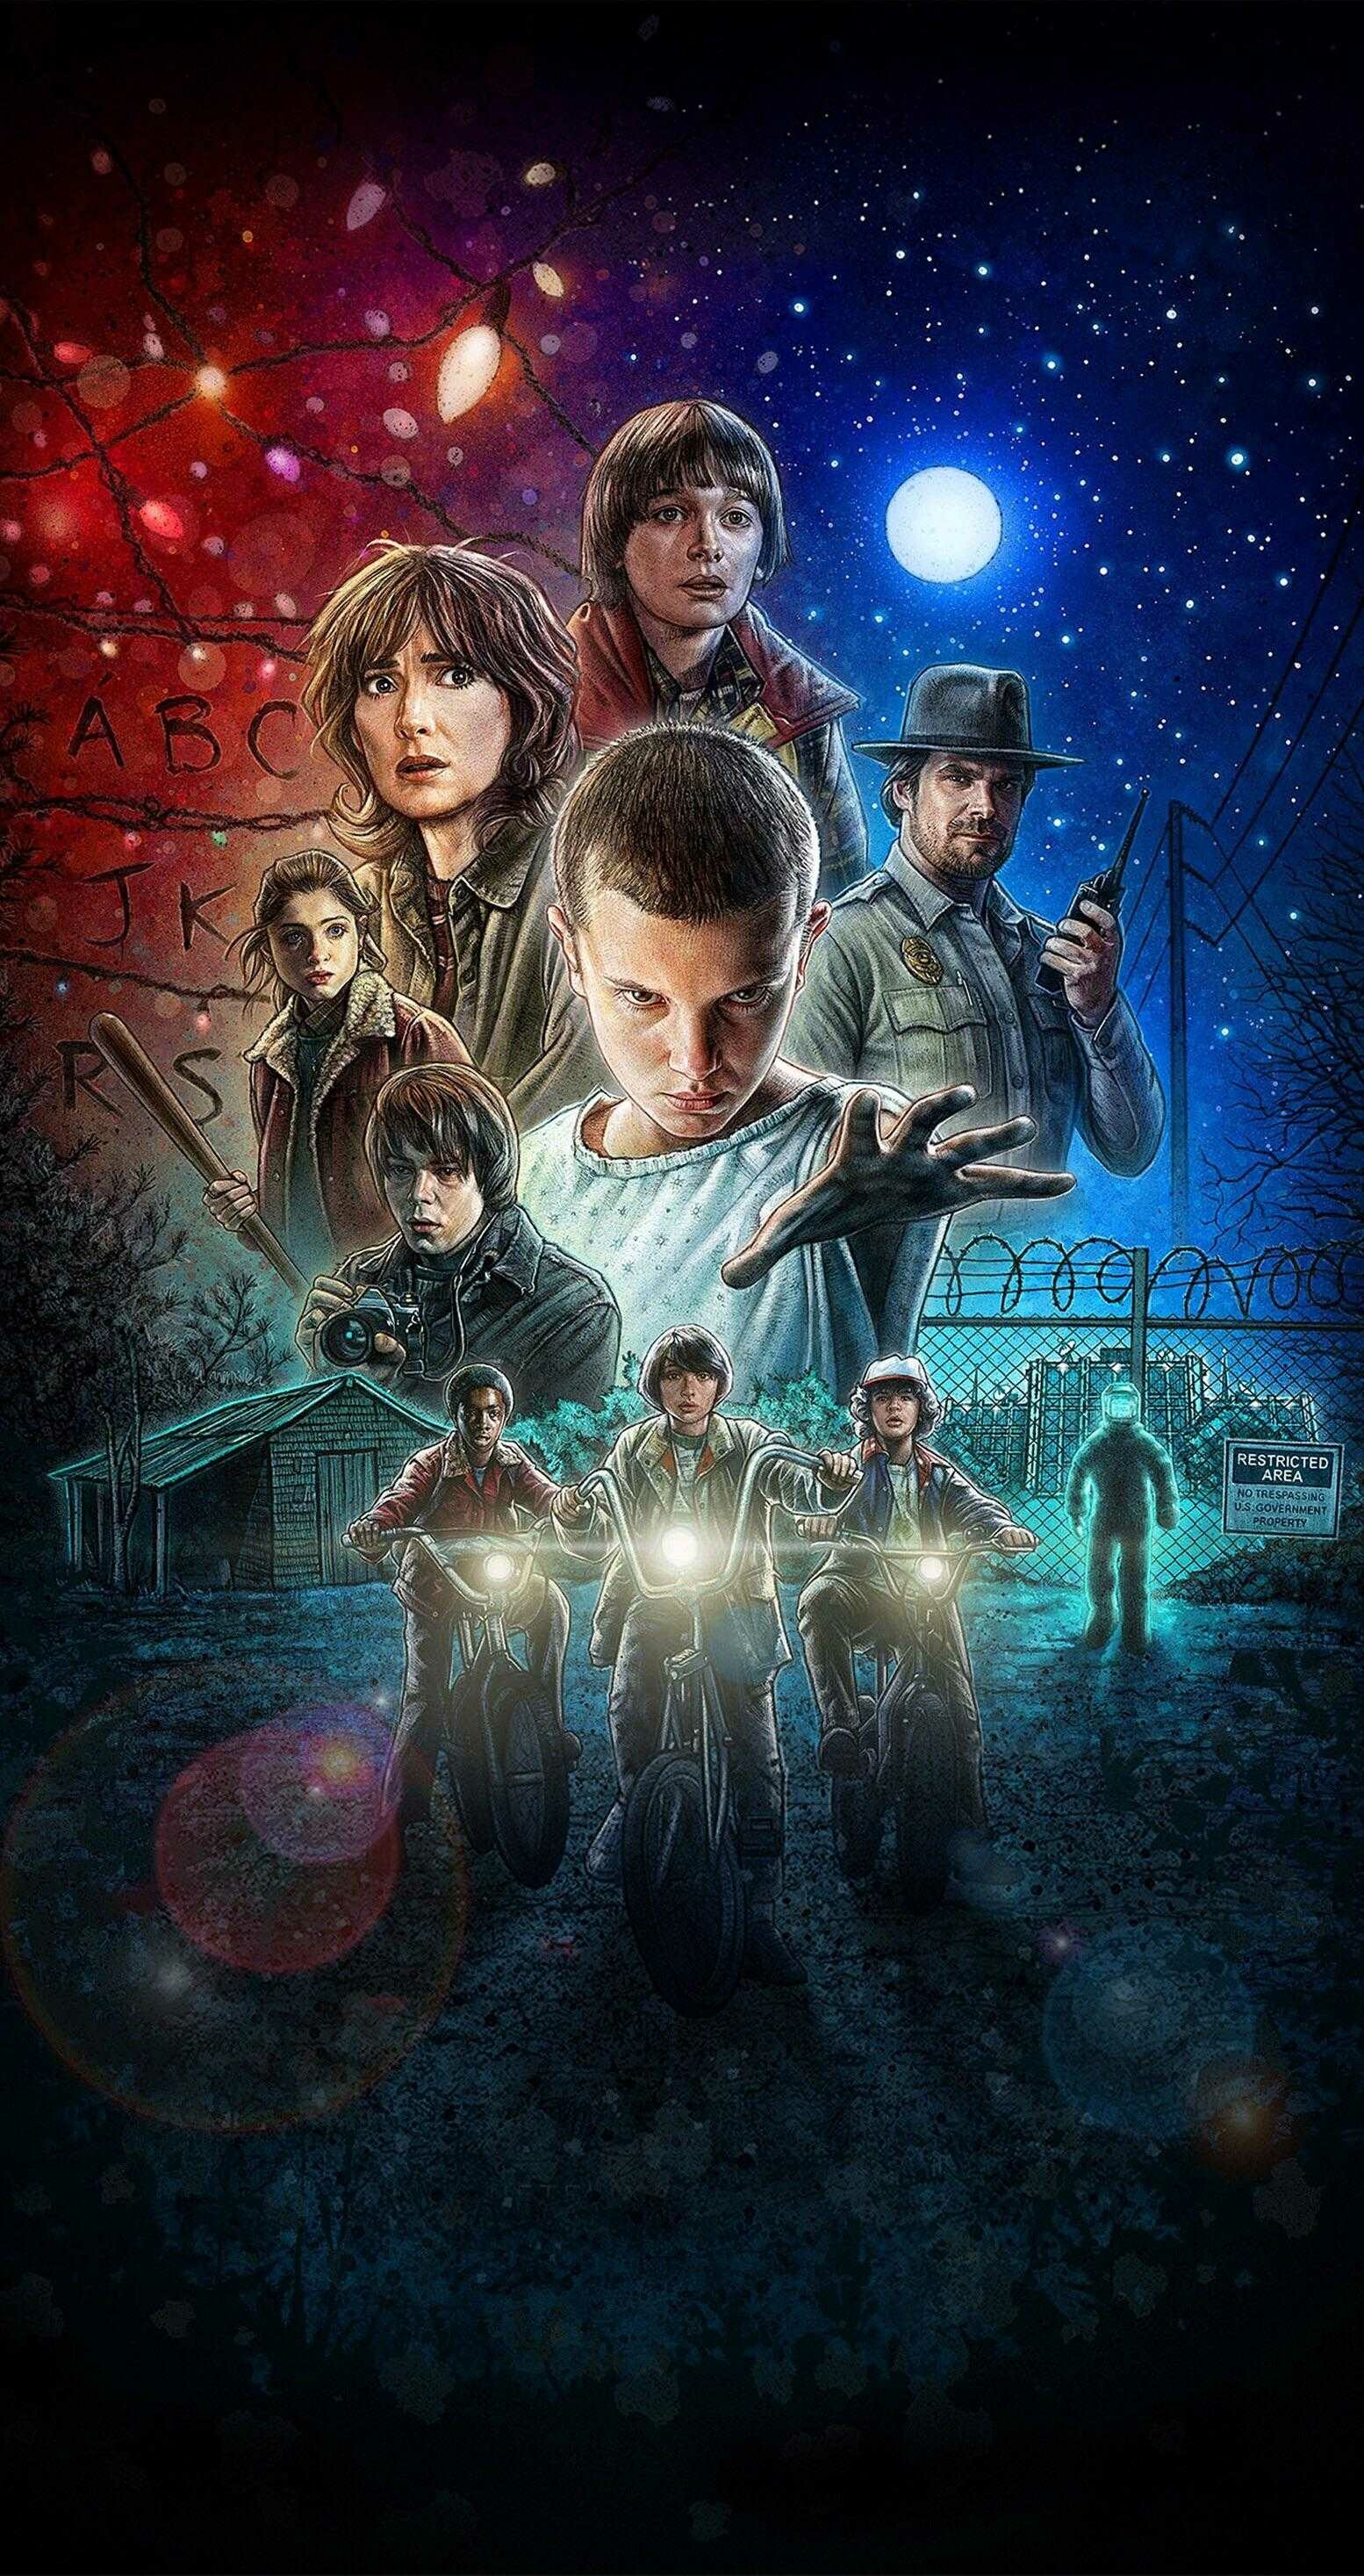 Stranger Things: The residents of the town of Hawkins are plagued by a hostile alternate dimension known as the "Upside Down". 1560x2940 HD Background.